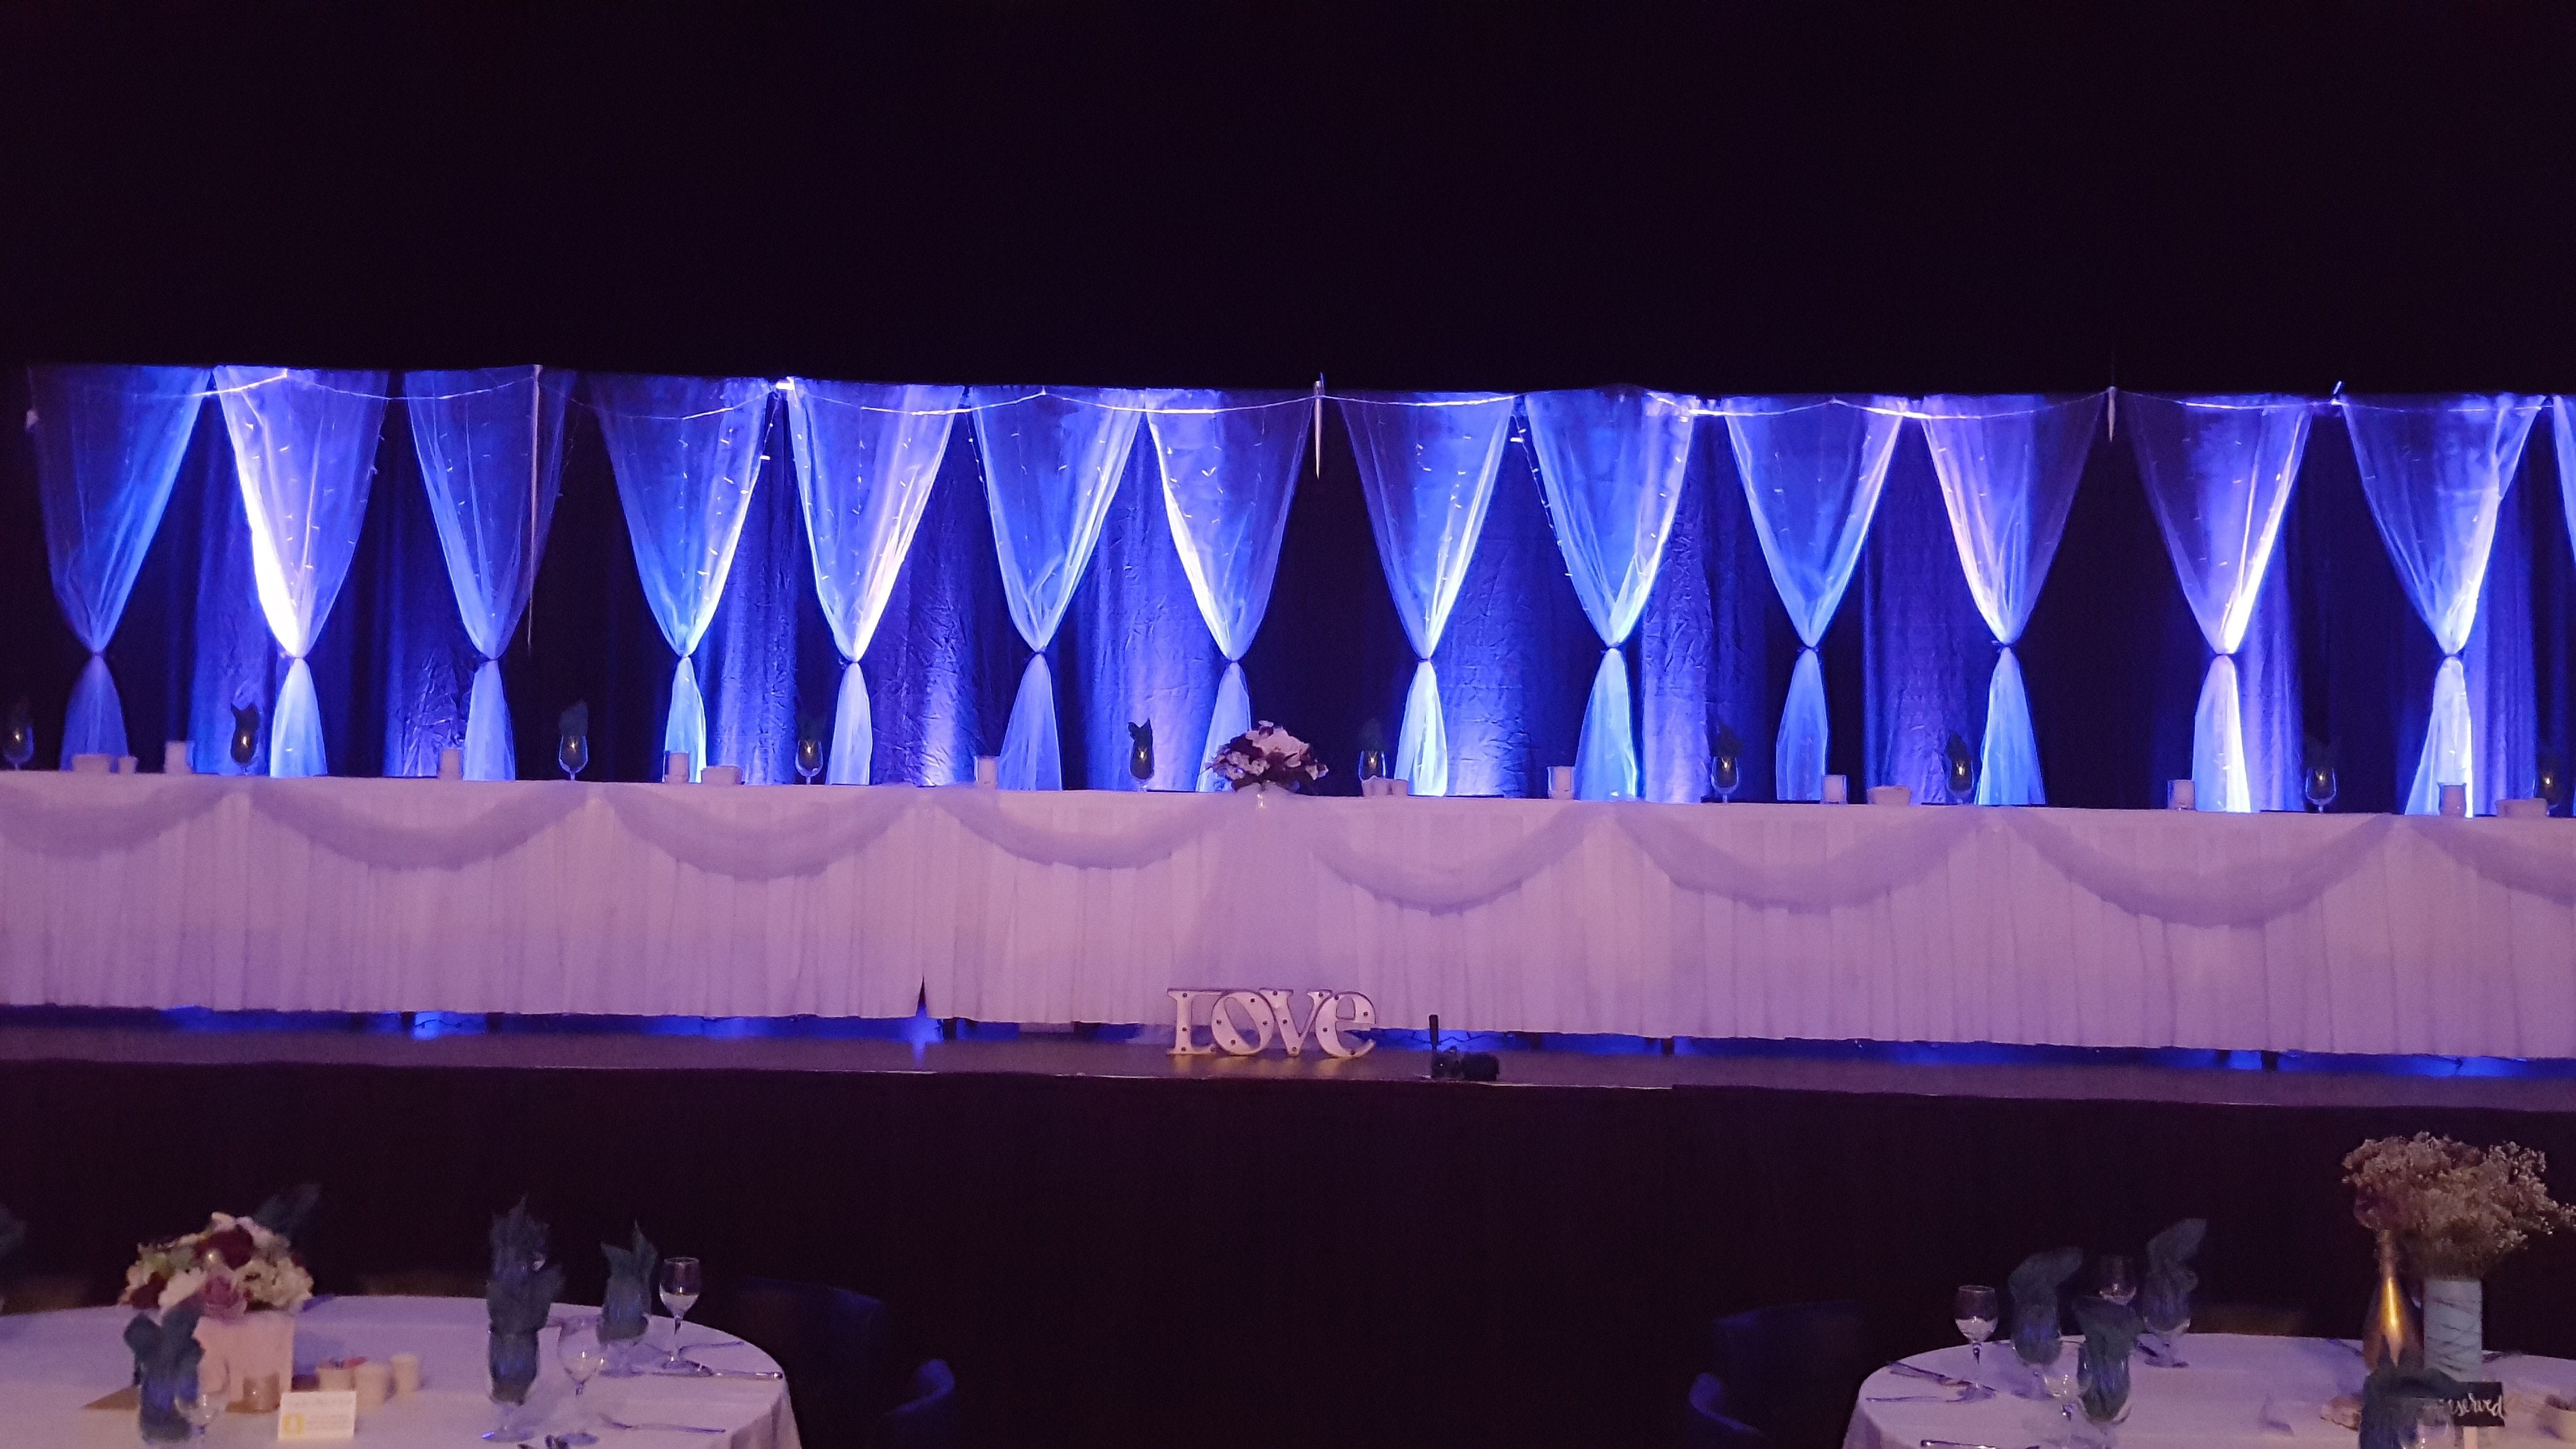 A wedding head table backdrop with up lighting.